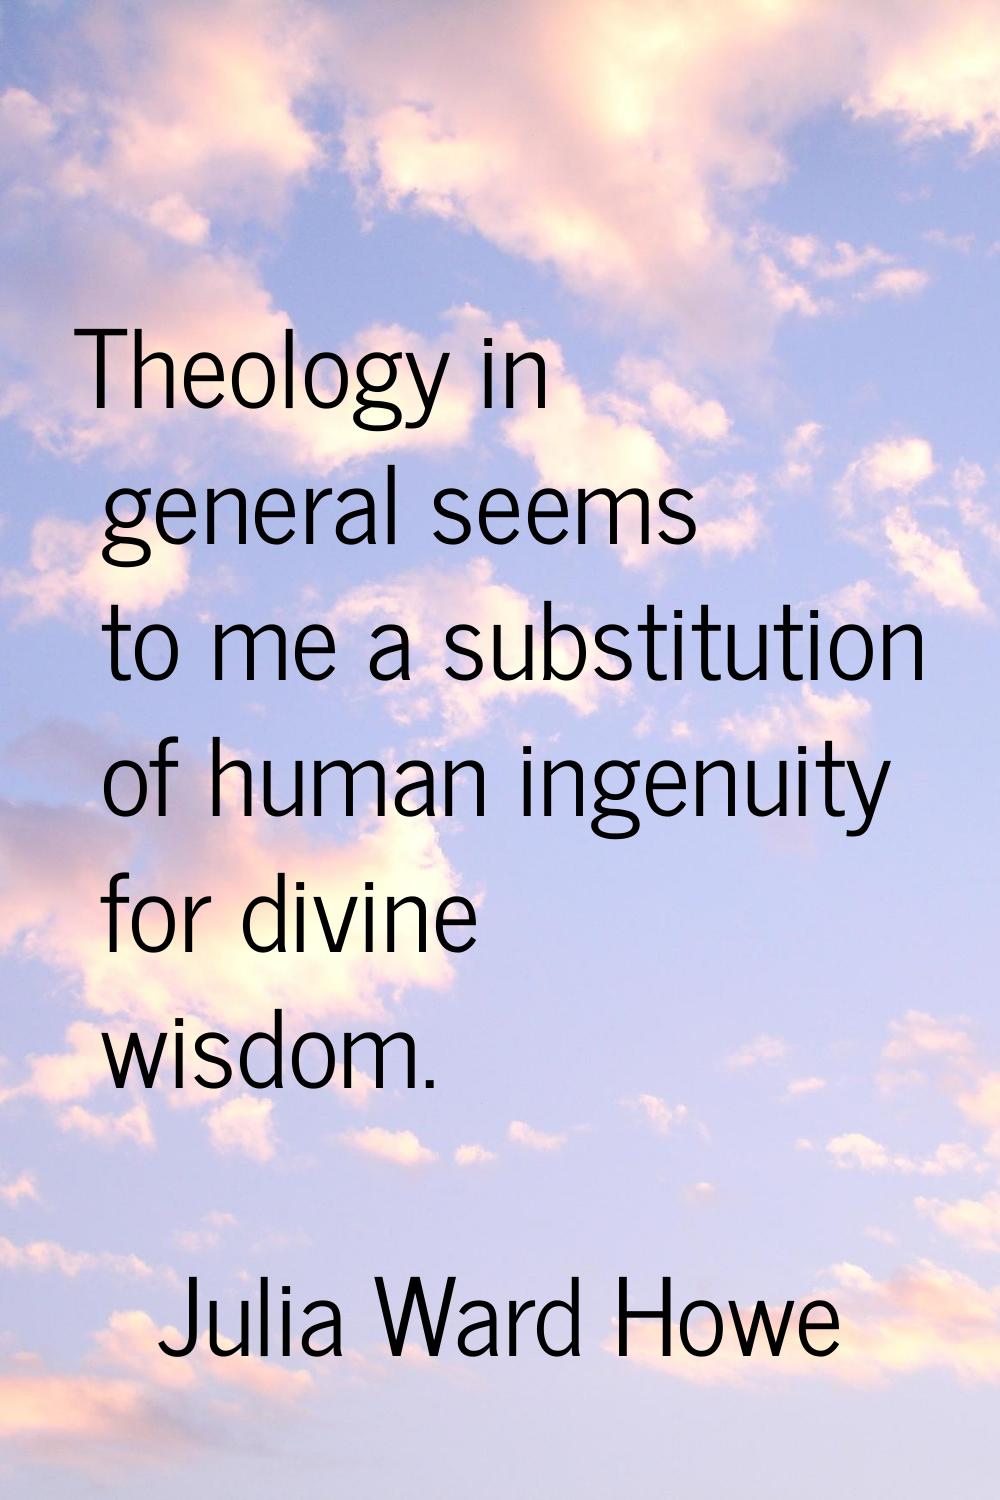 Theology in general seems to me a substitution of human ingenuity for divine wisdom.